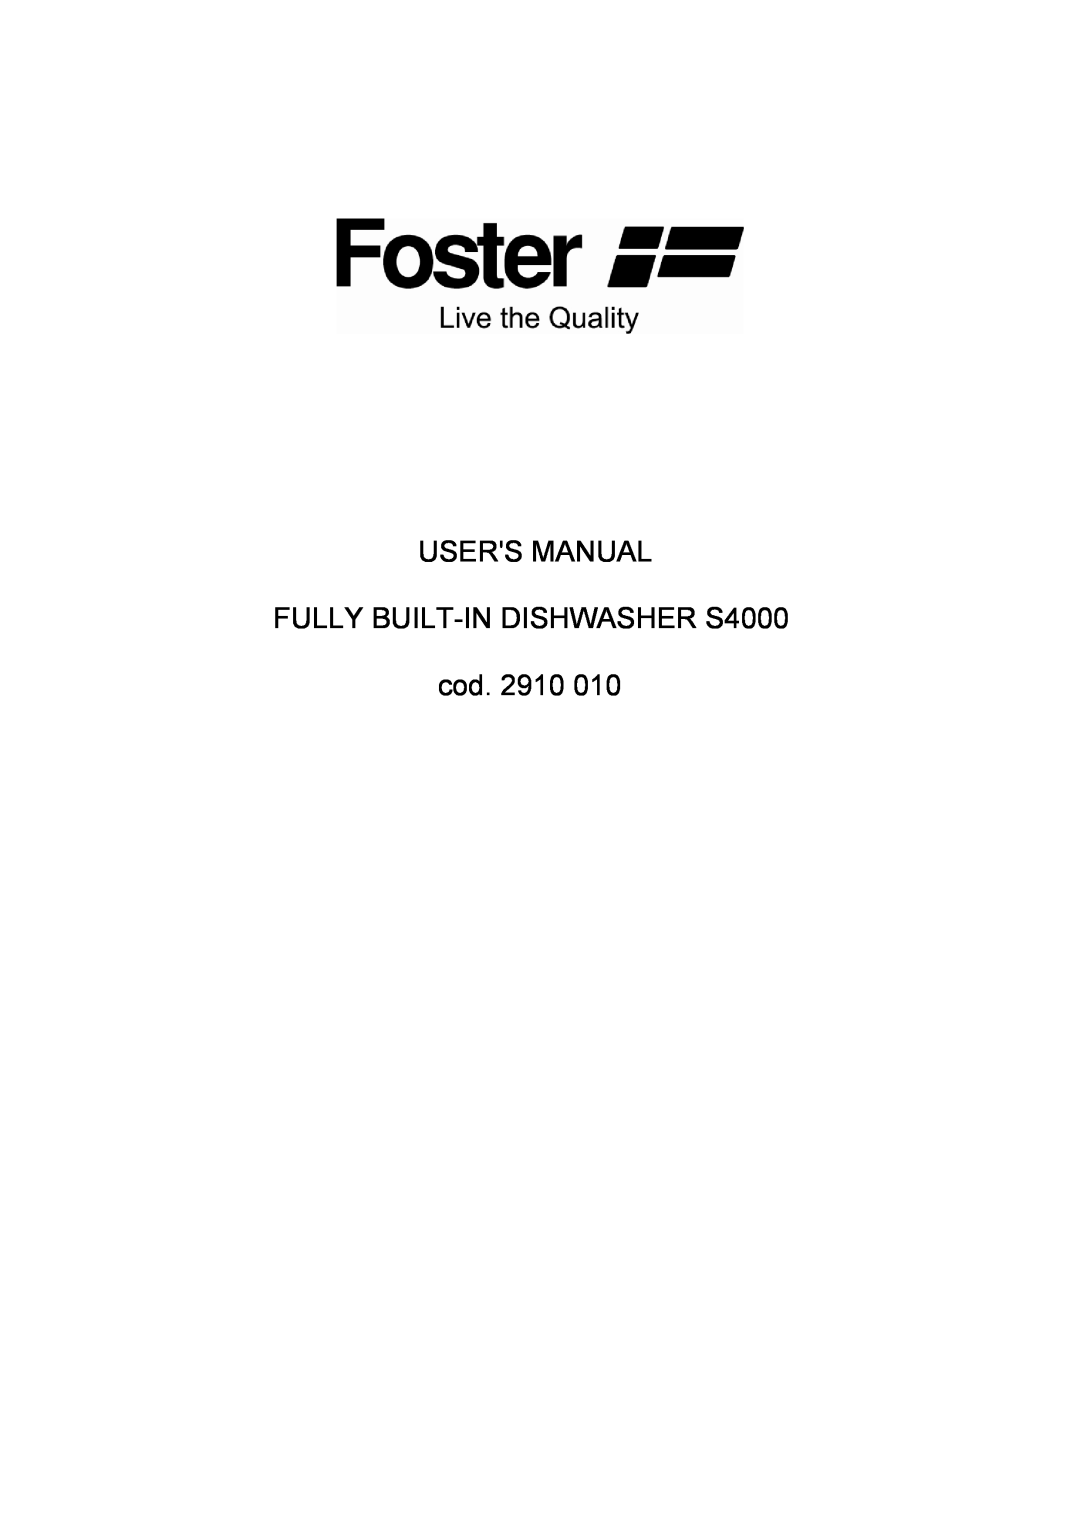 Foster manual USERS MANUAL FULLY BUILT-IN DISHWASHER S4000 cod. 2910 